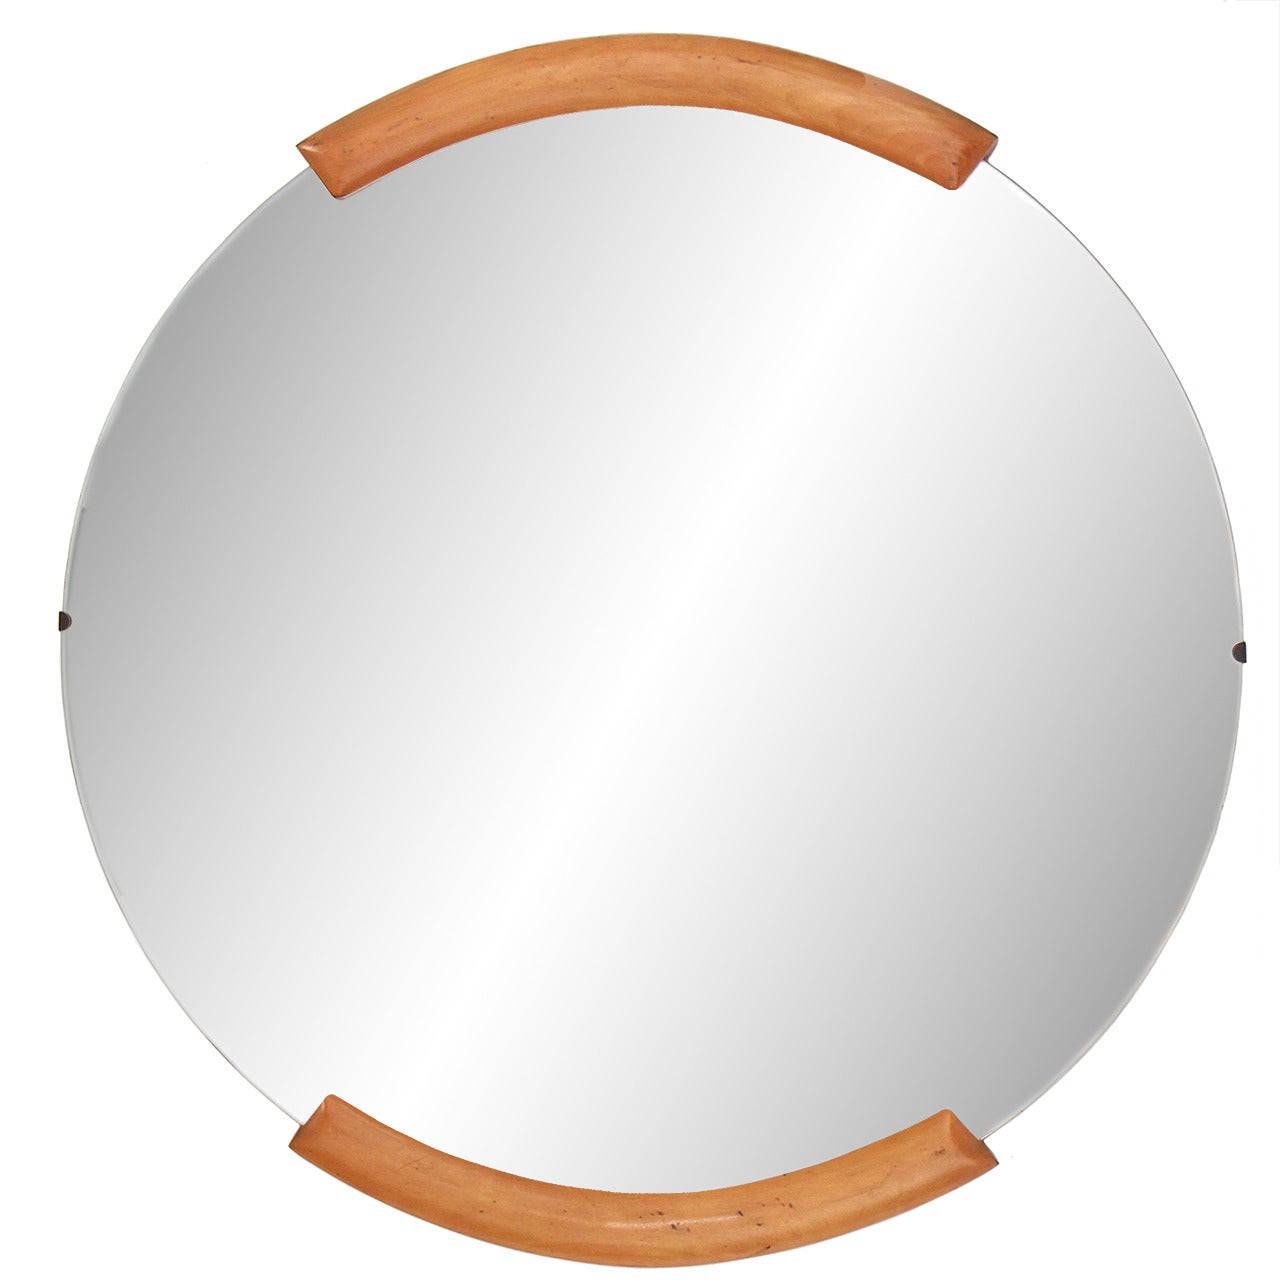 Art Deco Maple-Accented American Modern Mirror by Russel Wright for Conan Ball For Sale